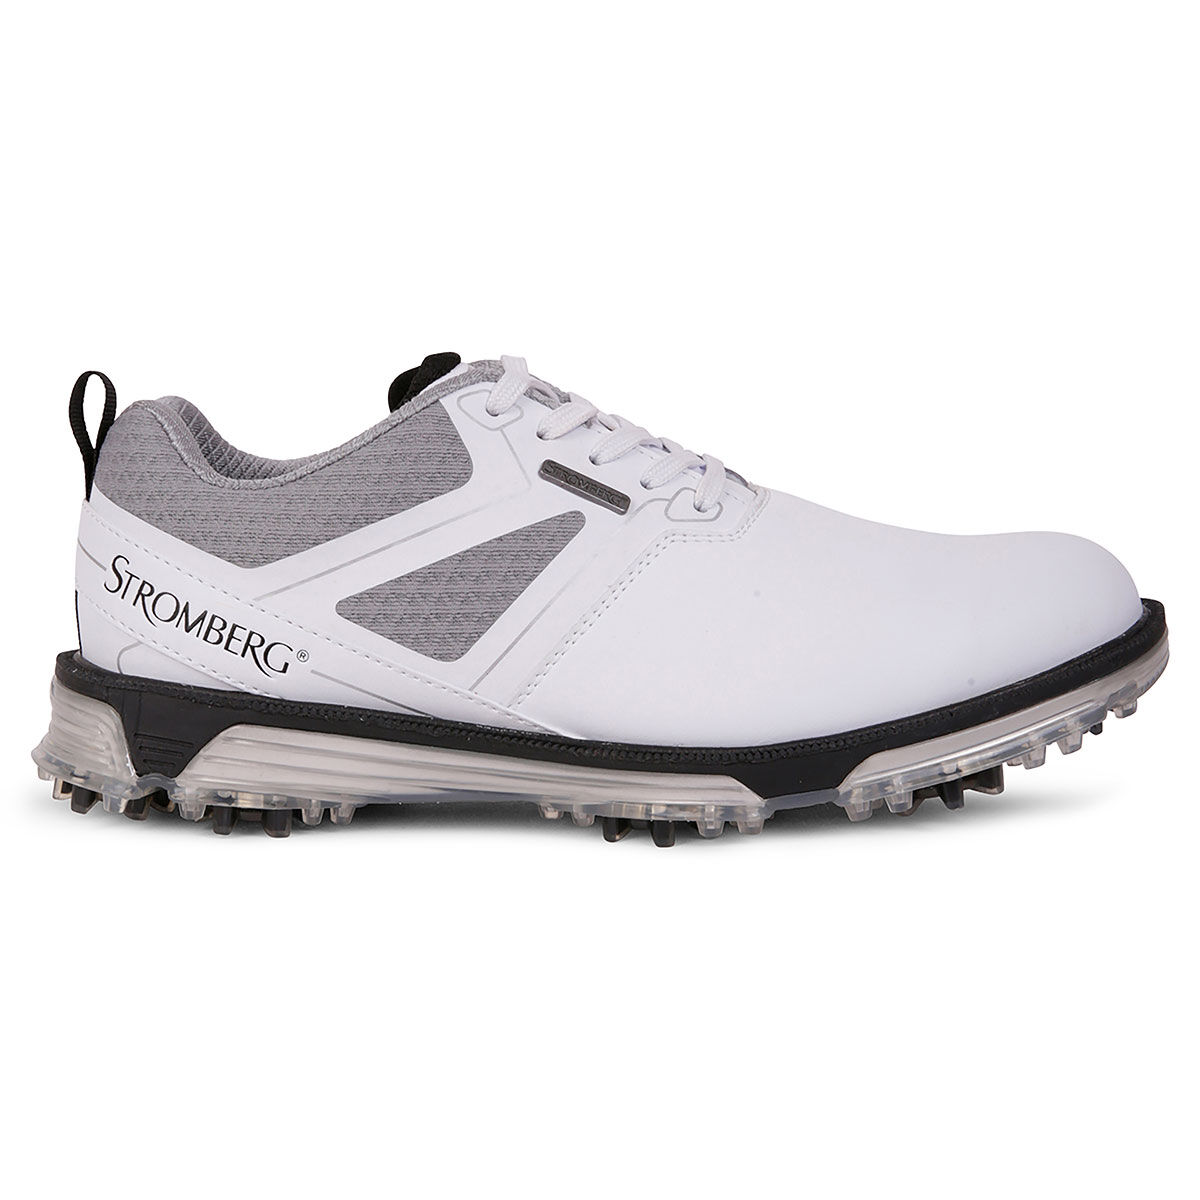 Stromberg Men's Tour Classic Waterproof Spiked Golf Shoes, Mens, White, 7 | American Golf - Father's Day Gift von Stromberg